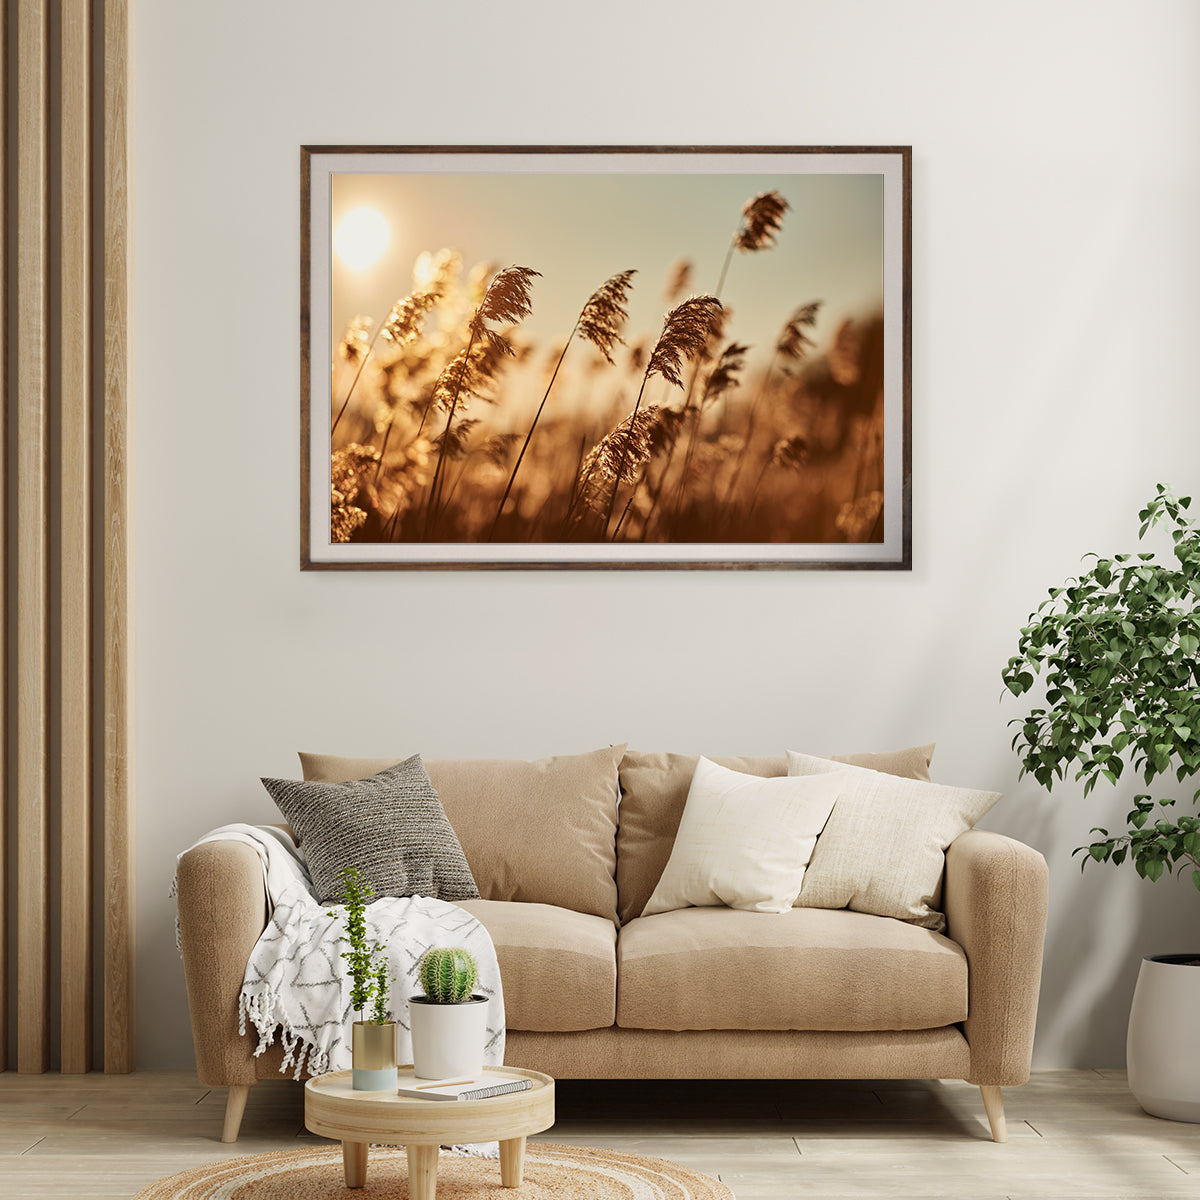 Reeds in Rays of Setting Sun Poster For Living Room-Horizontal Posters NOT FRAMED-CetArt-10″x8″ inches-CetArt